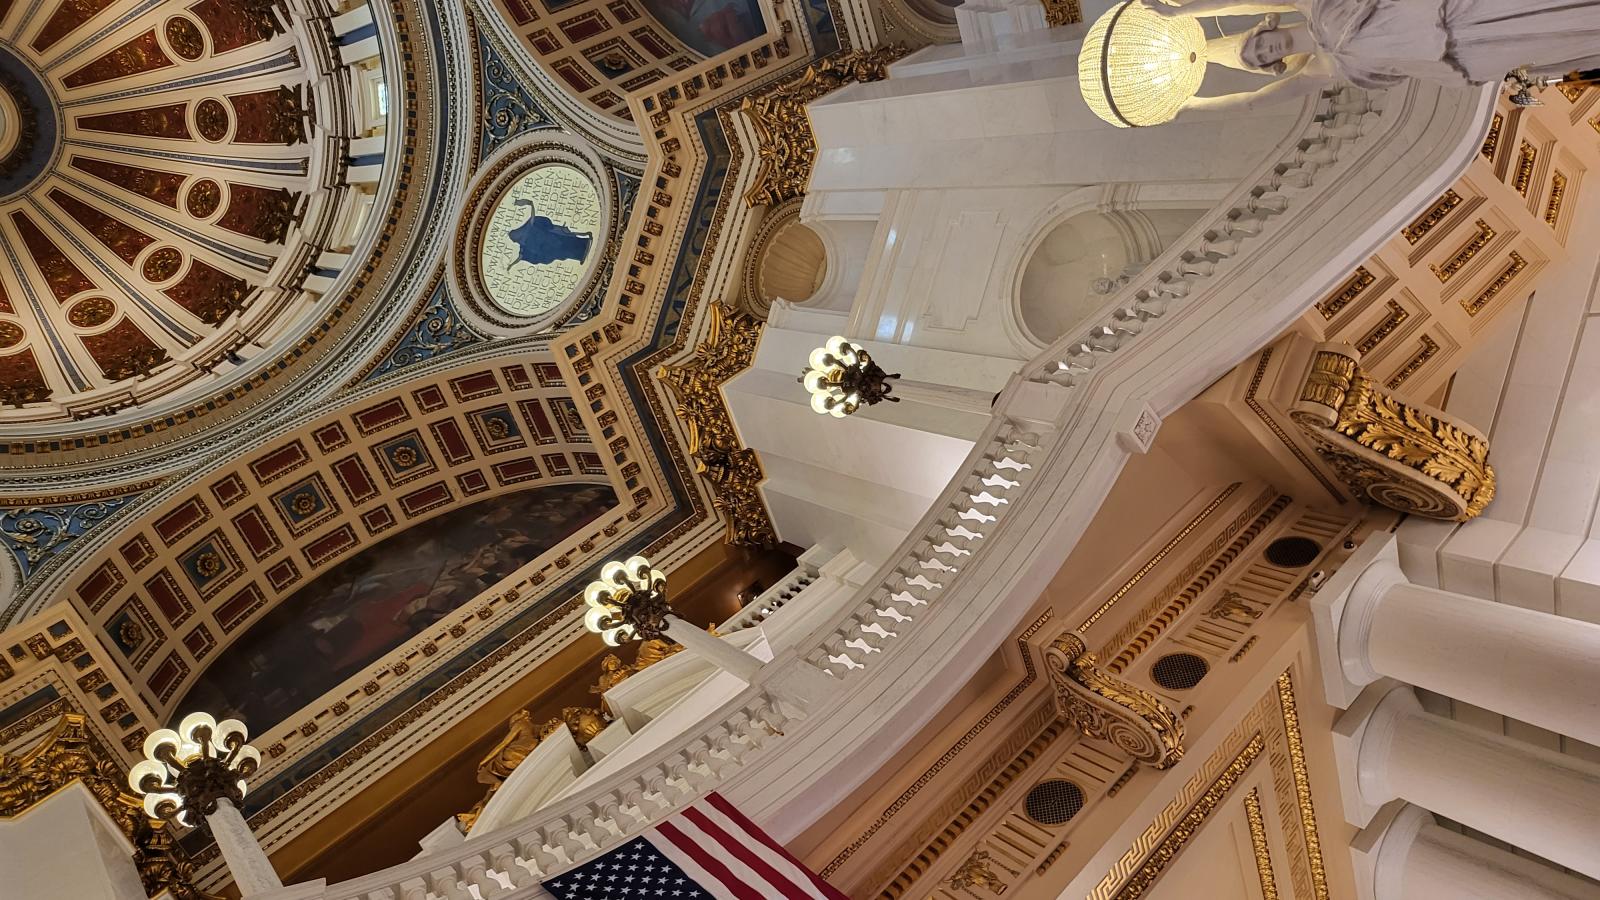 Inside of Capitol building